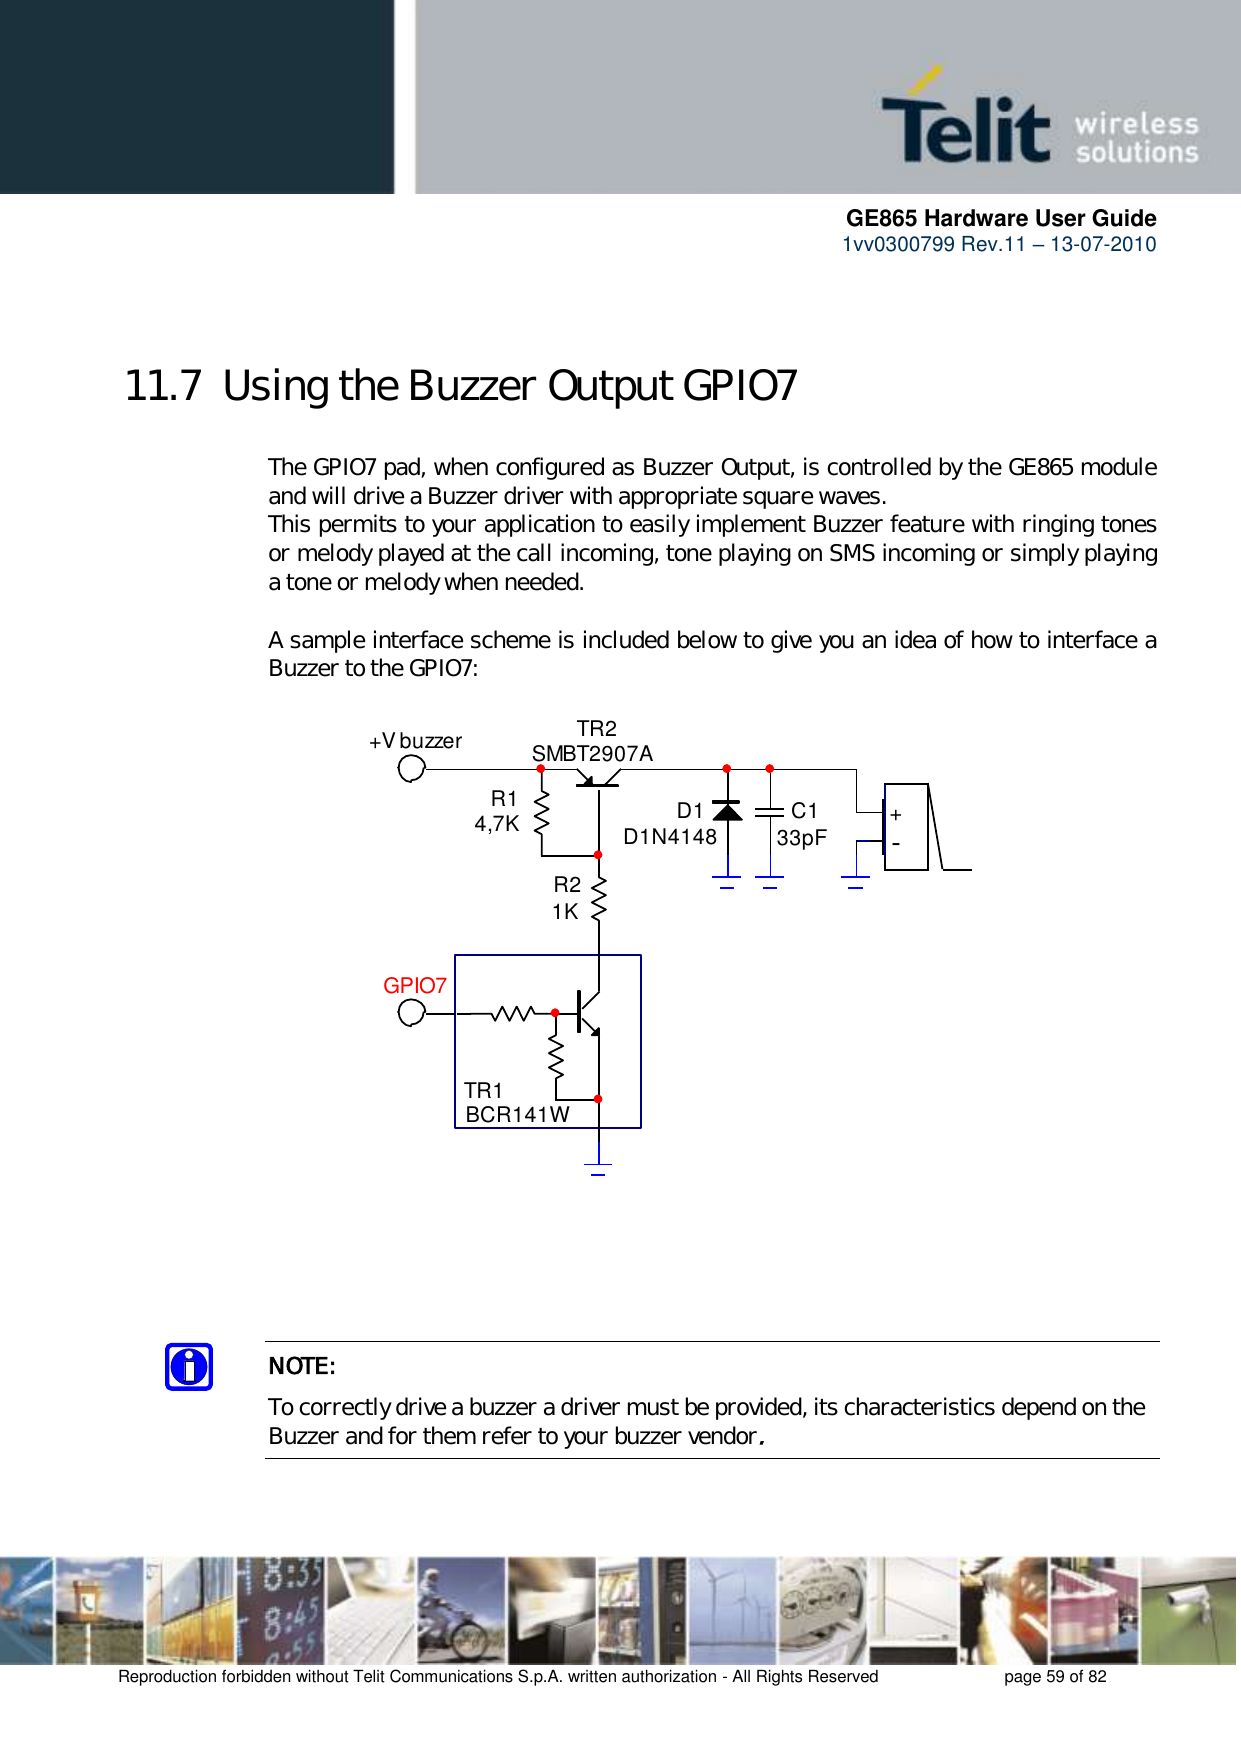      GE865 Hardware User Guide 1vv0300799 Rev.11 – 13-07-2010       Reproduction forbidden without Telit Communications S.p.A. written authorization - All Rights Reserved    page 59 of 82   11.7  Using the Buzzer Output GPIO7  The GPIO7 pad, when configured as Buzzer Output, is controlled by the GE865 module and will drive a Buzzer driver with appropriate square waves. This permits to your application to easily implement Buzzer feature with ringing tones or melody played at the call incoming, tone playing on SMS incoming or simply playing a tone or melody when needed.  A sample interface scheme is included below to give you an idea of how to interface a Buzzer to the GPIO7:  TR1BCR141WTR2SMBT2907AR14,7KR21KD1D1N4148 C133pF +-+V buzzerGPIO7     NOTE: To correctly drive a buzzer a driver must be provided, its characteristics depend on the Buzzer and for them refer to your buzzer vendor.   